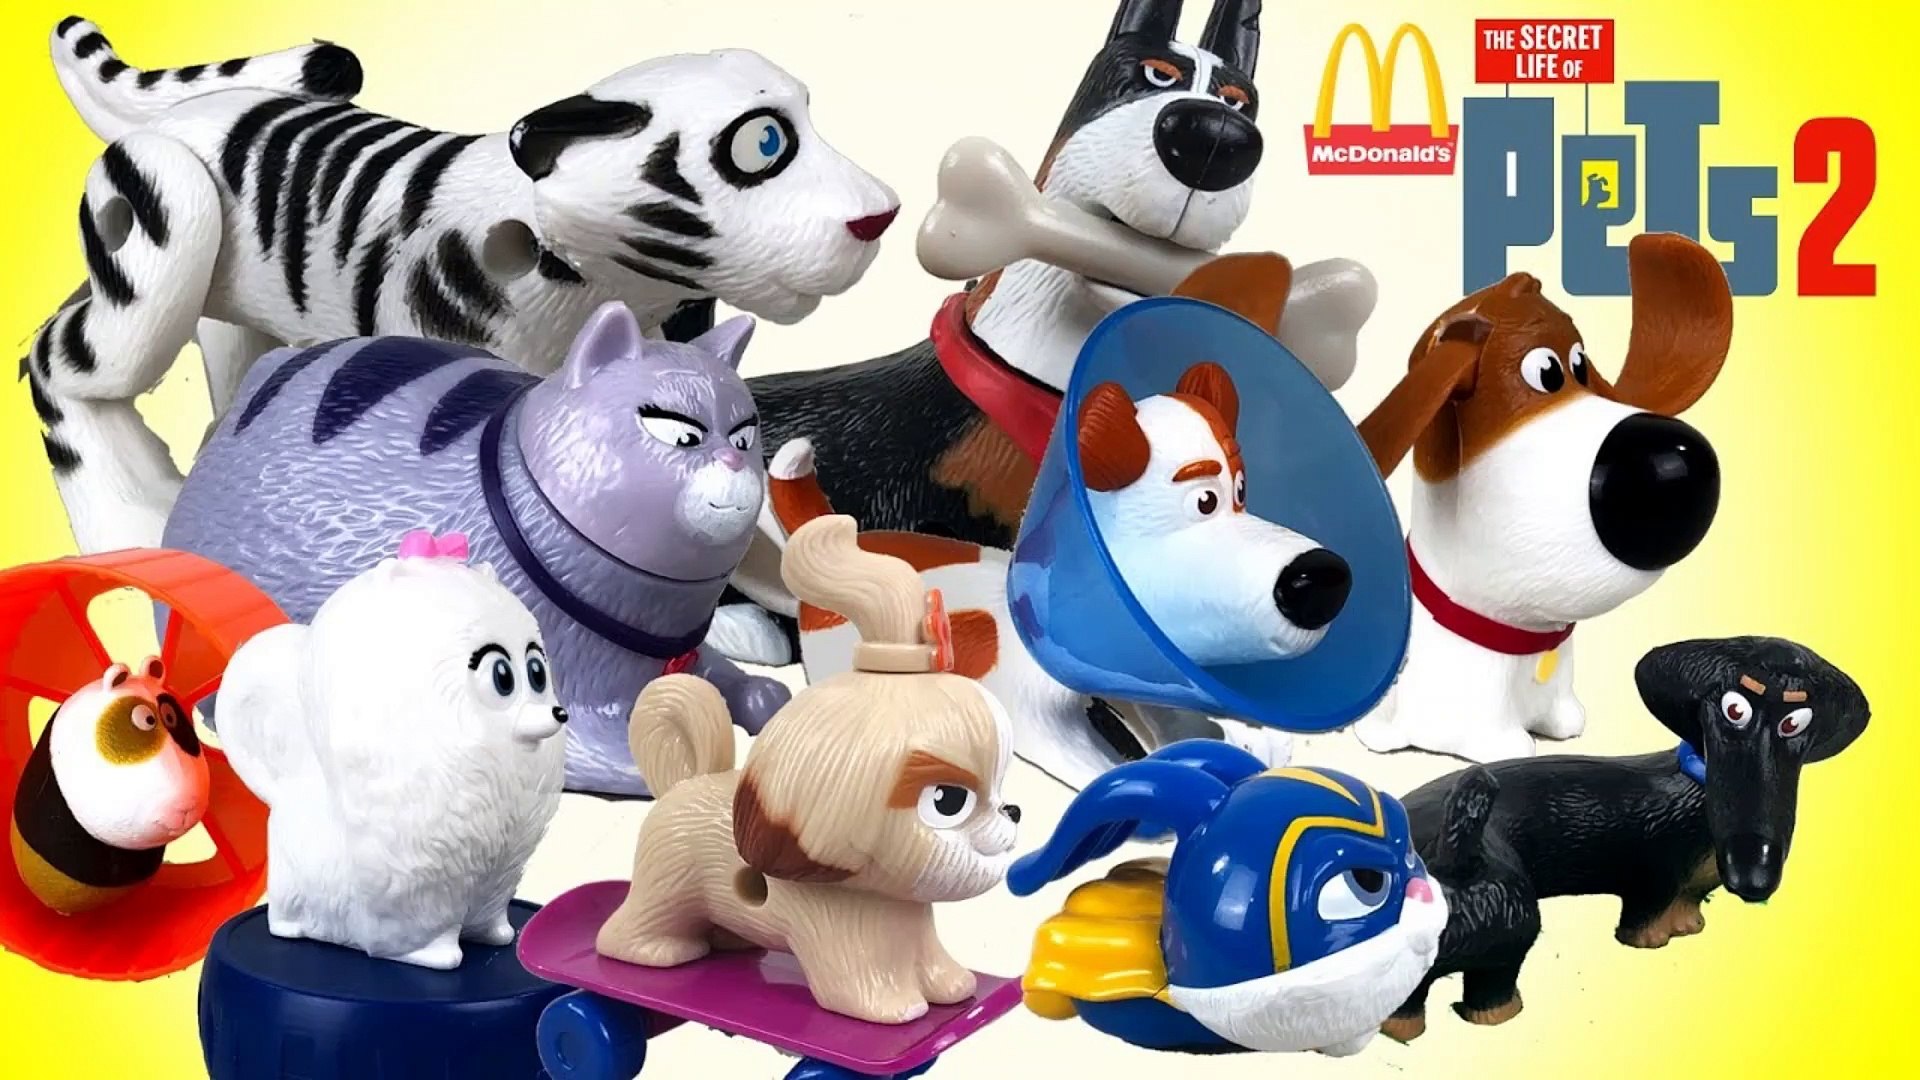 happy meal the secret life of pets 2